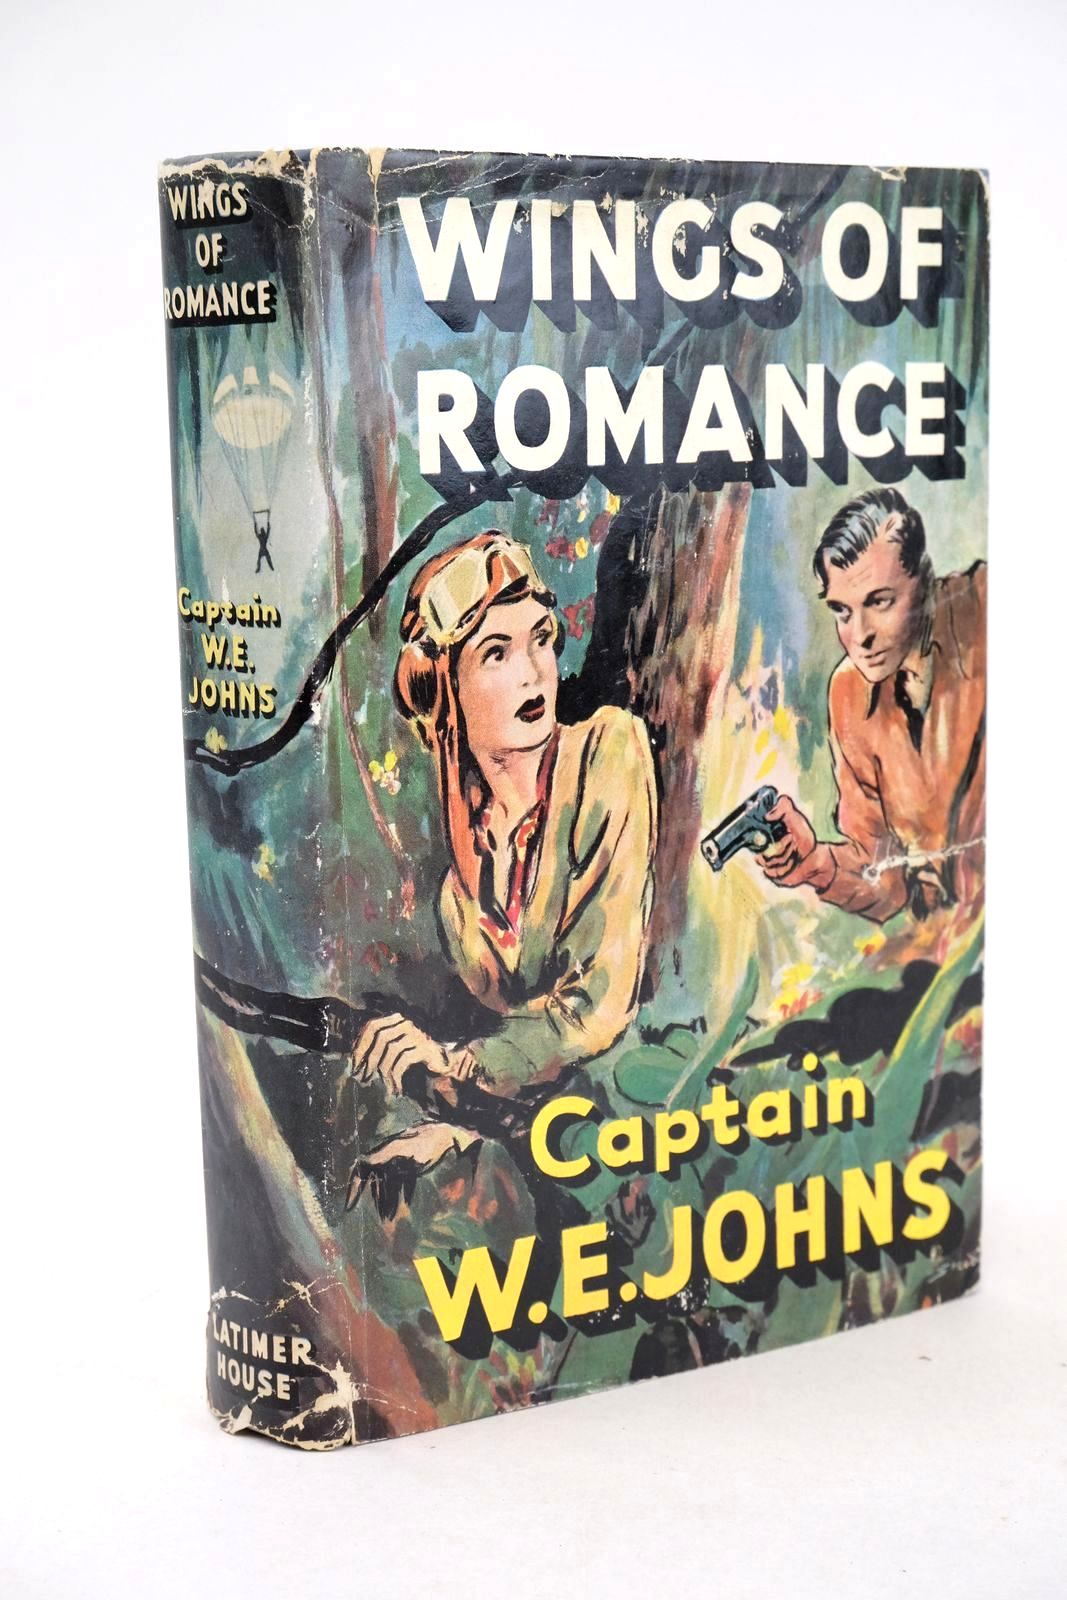 Photo of WINGS OF ROMANCE written by Johns, W.E. published by Latimer House (STOCK CODE: 1326123)  for sale by Stella & Rose's Books